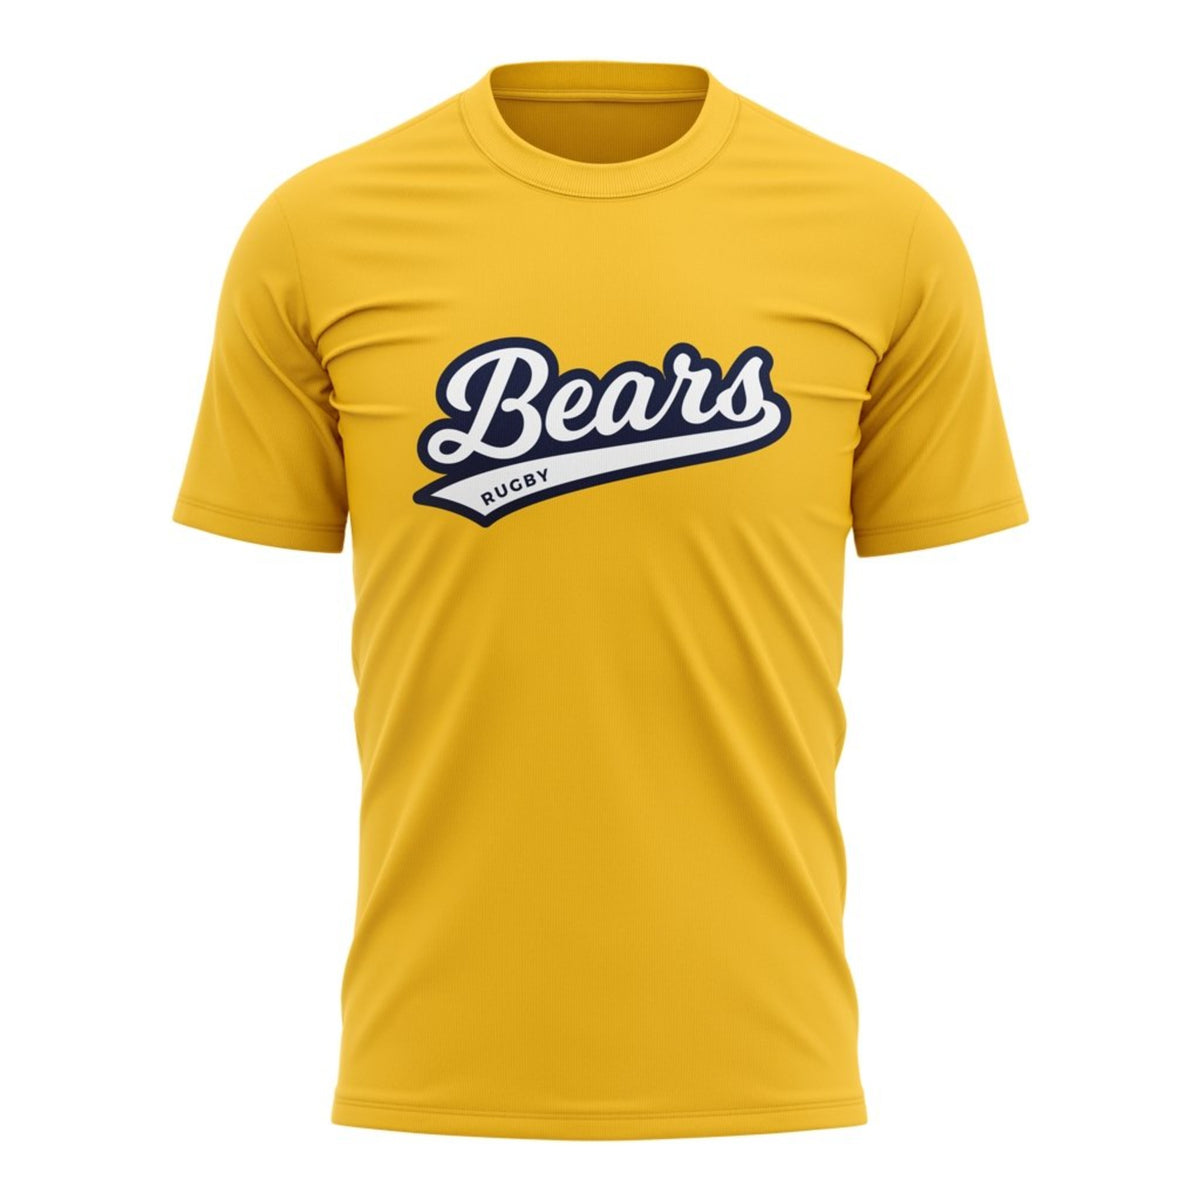 BC Rugby 2021 &quot;Bears&quot; Tee - Youth White/Gold - www.therugbyshop.com www.therugbyshop.com YOUTH / GOLD / XS XIX Brands TEES BC Rugby 2021 &quot;Bears&quot; Tee - Youth White/Gold